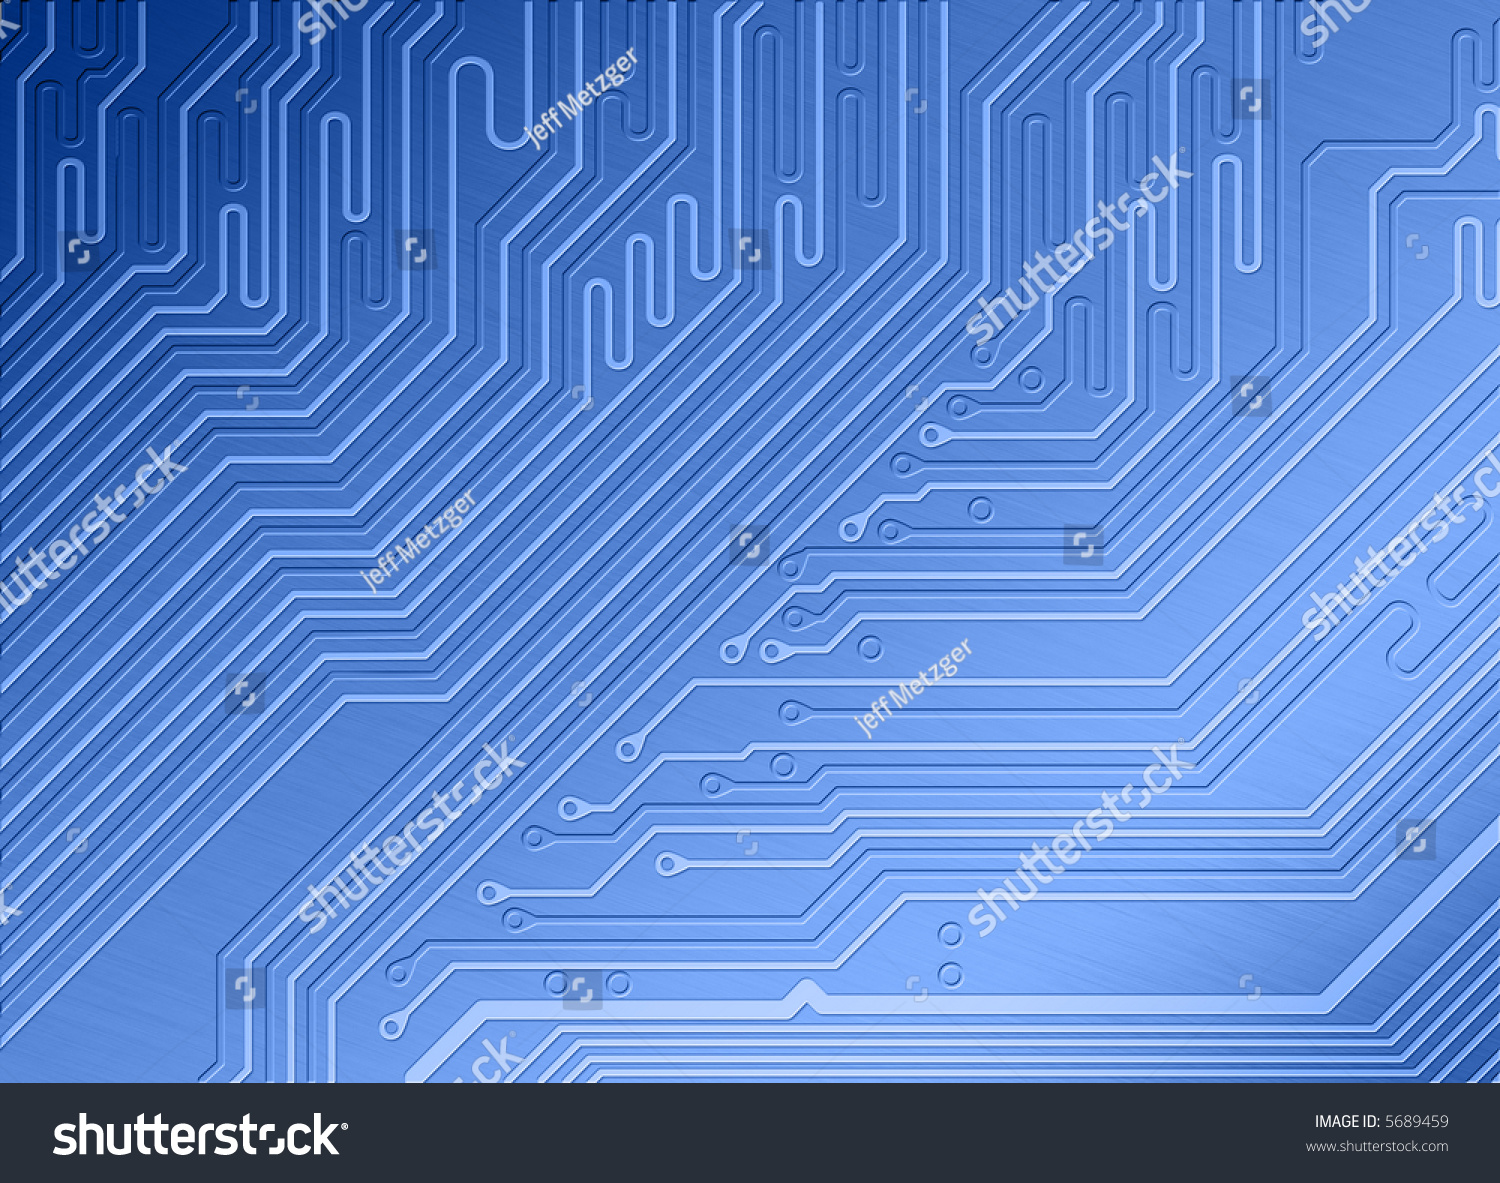 A Techy Background Of Circuit Board Stock Photo